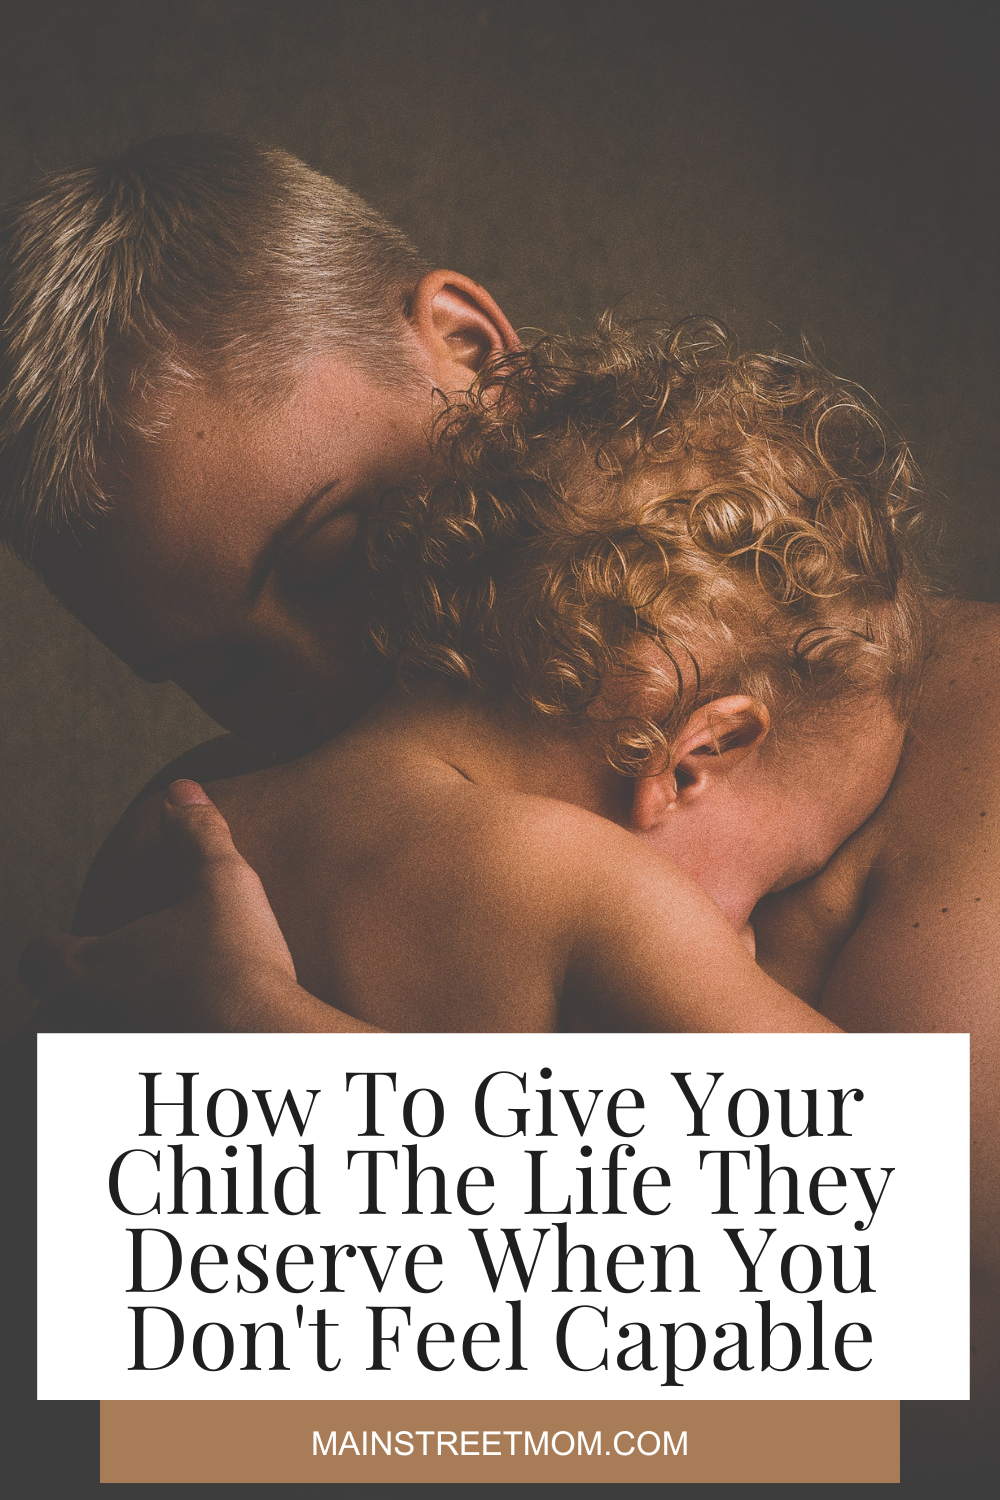 How To Give Your Child The Life They Deserve When You Don't Feel Capable